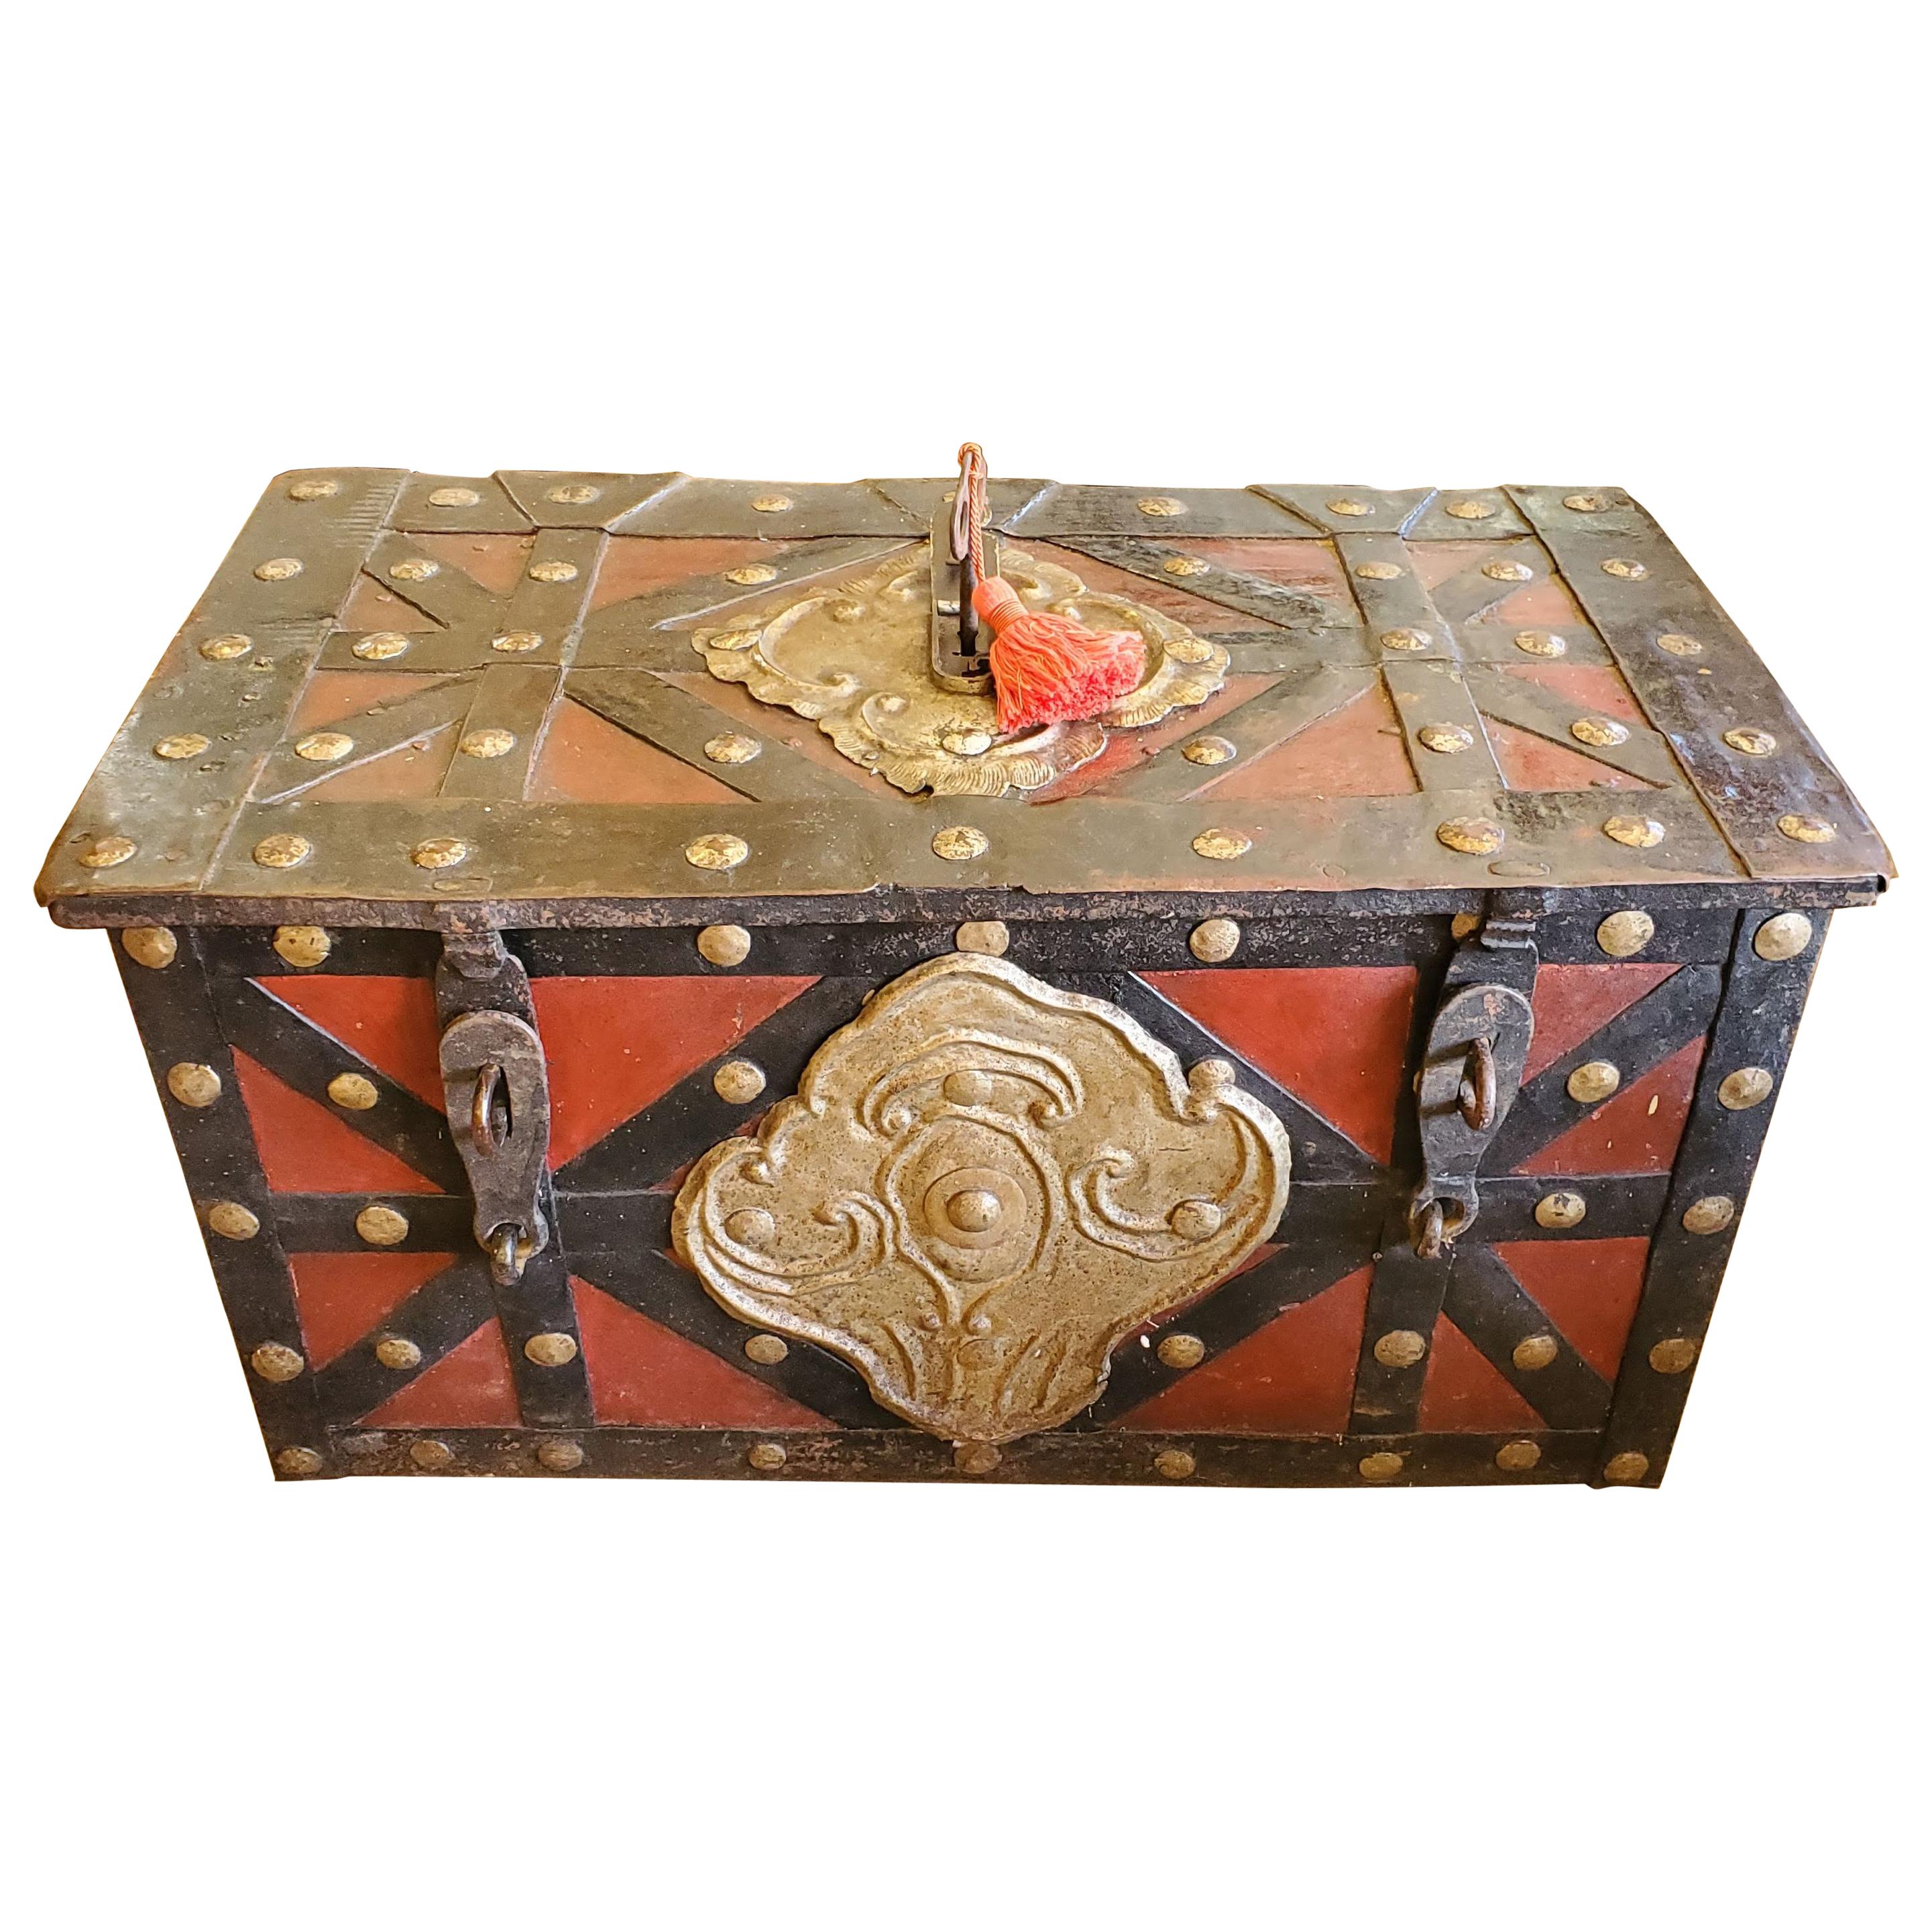 17th Century Red and Black Spanish “Armada” Style Iron Strong Box